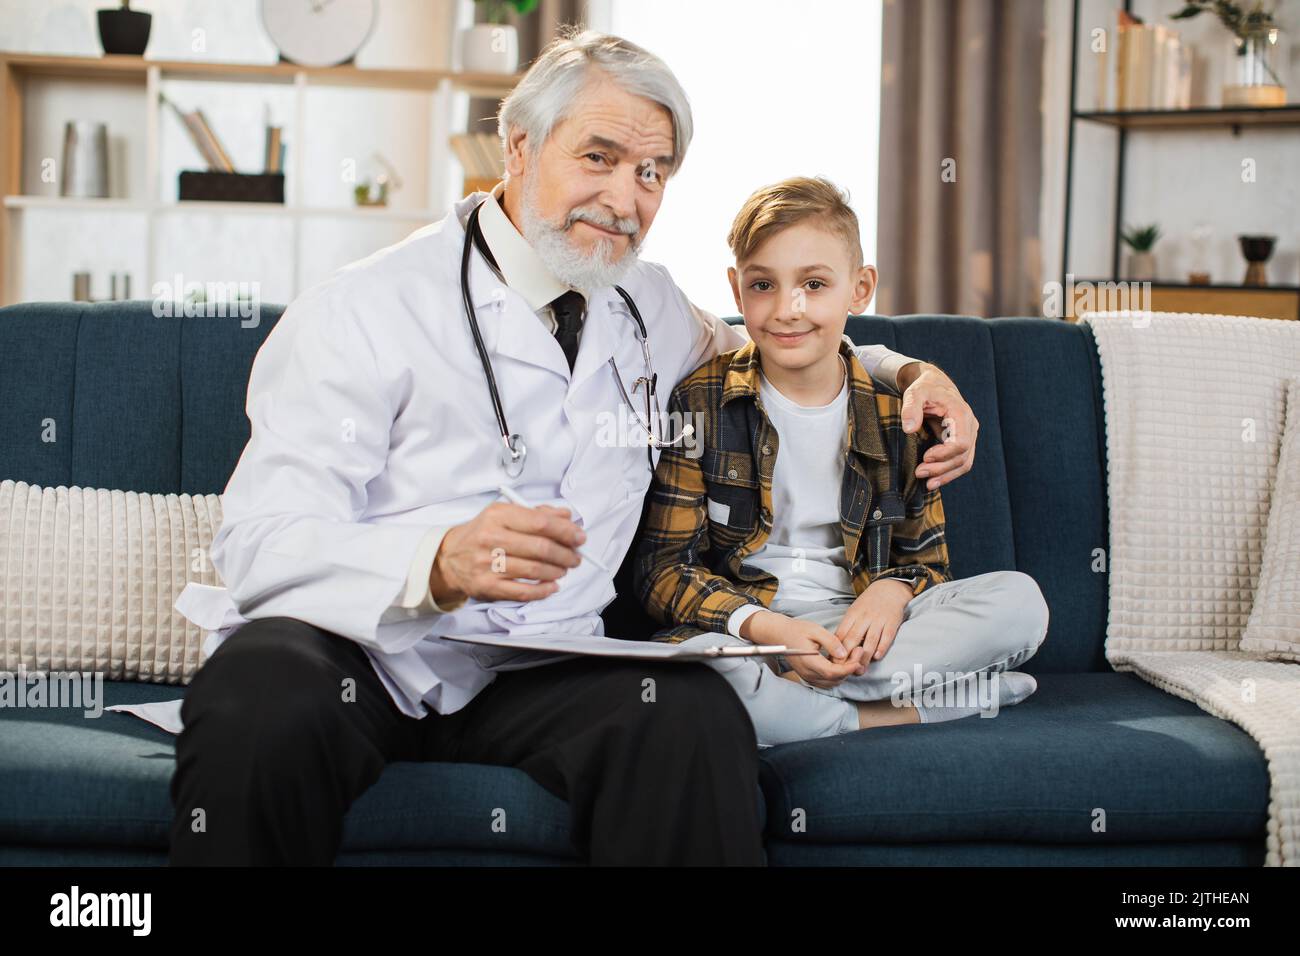 Mature man doctor in white coat and stethoscope on shoulders talking to sick boy patient, sitting on sofa, showing treatment plan, medication list, looking at camera. Stock Photo